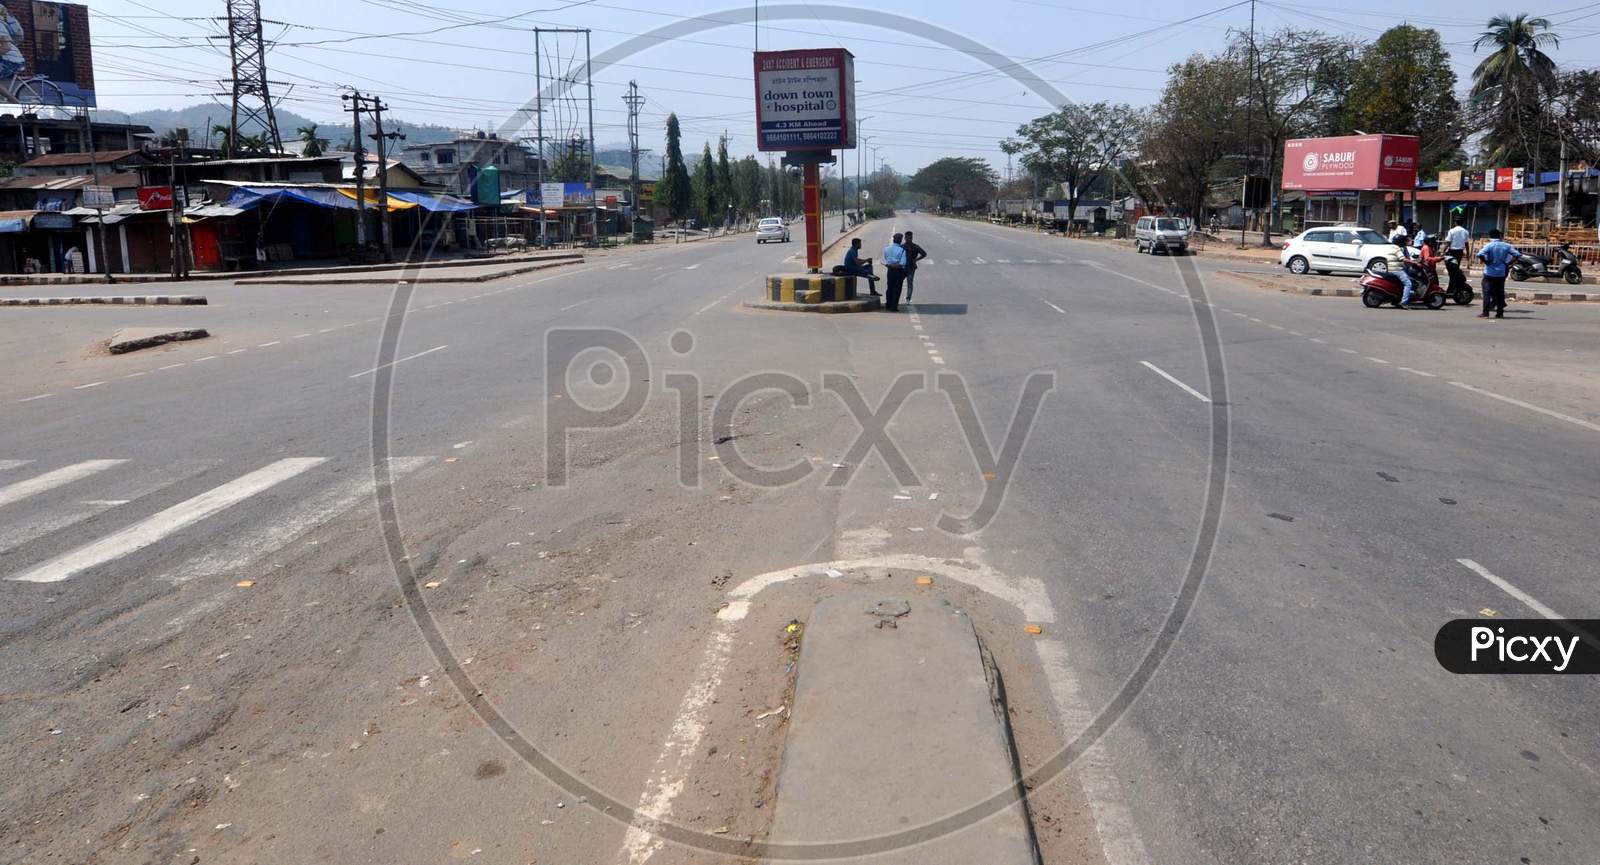 A Deserted View Of A 37 National Highway During Lockdown In Wake Of Corona Virus Pandemic In Guwahati On Wednesday, 25 March 2020.